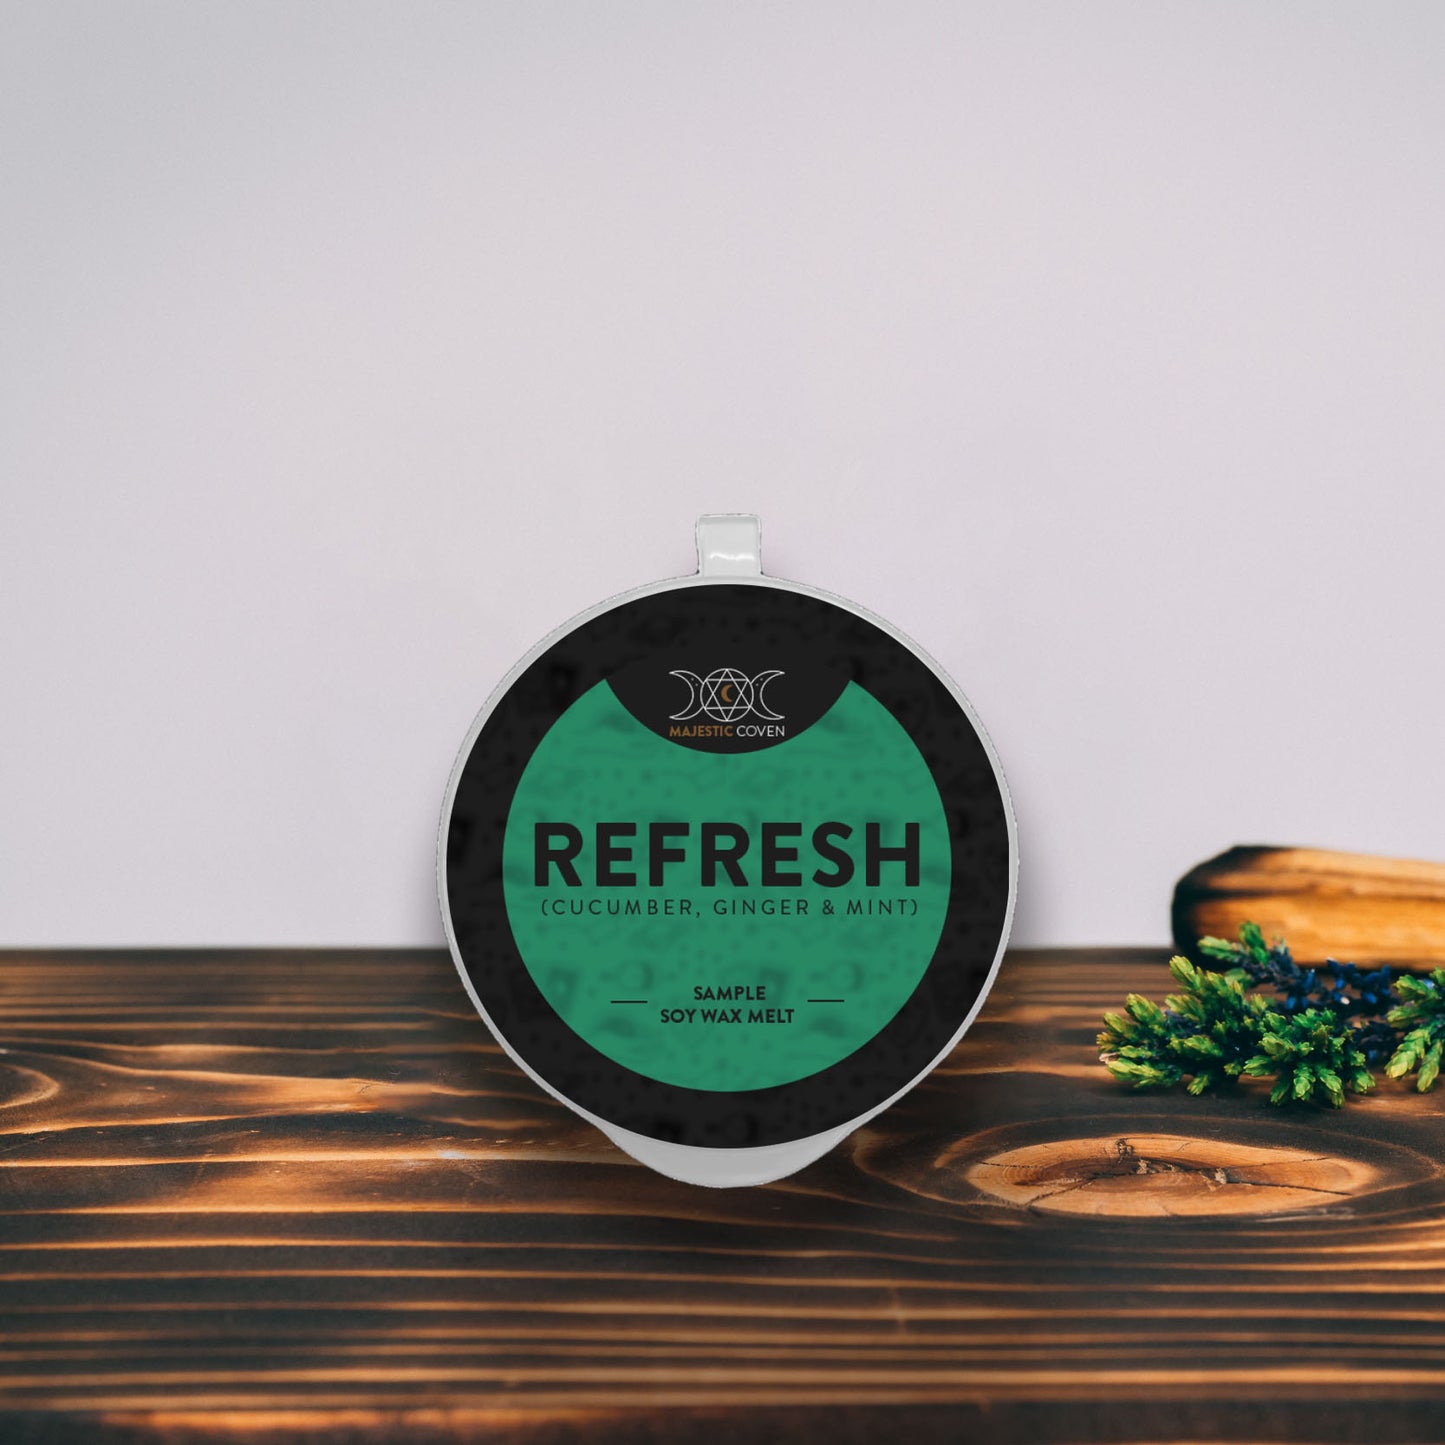 Refresh - Cucumber, Ginger & Mint - Soy Wax Melt 20g Sample Pot Majestic Coven